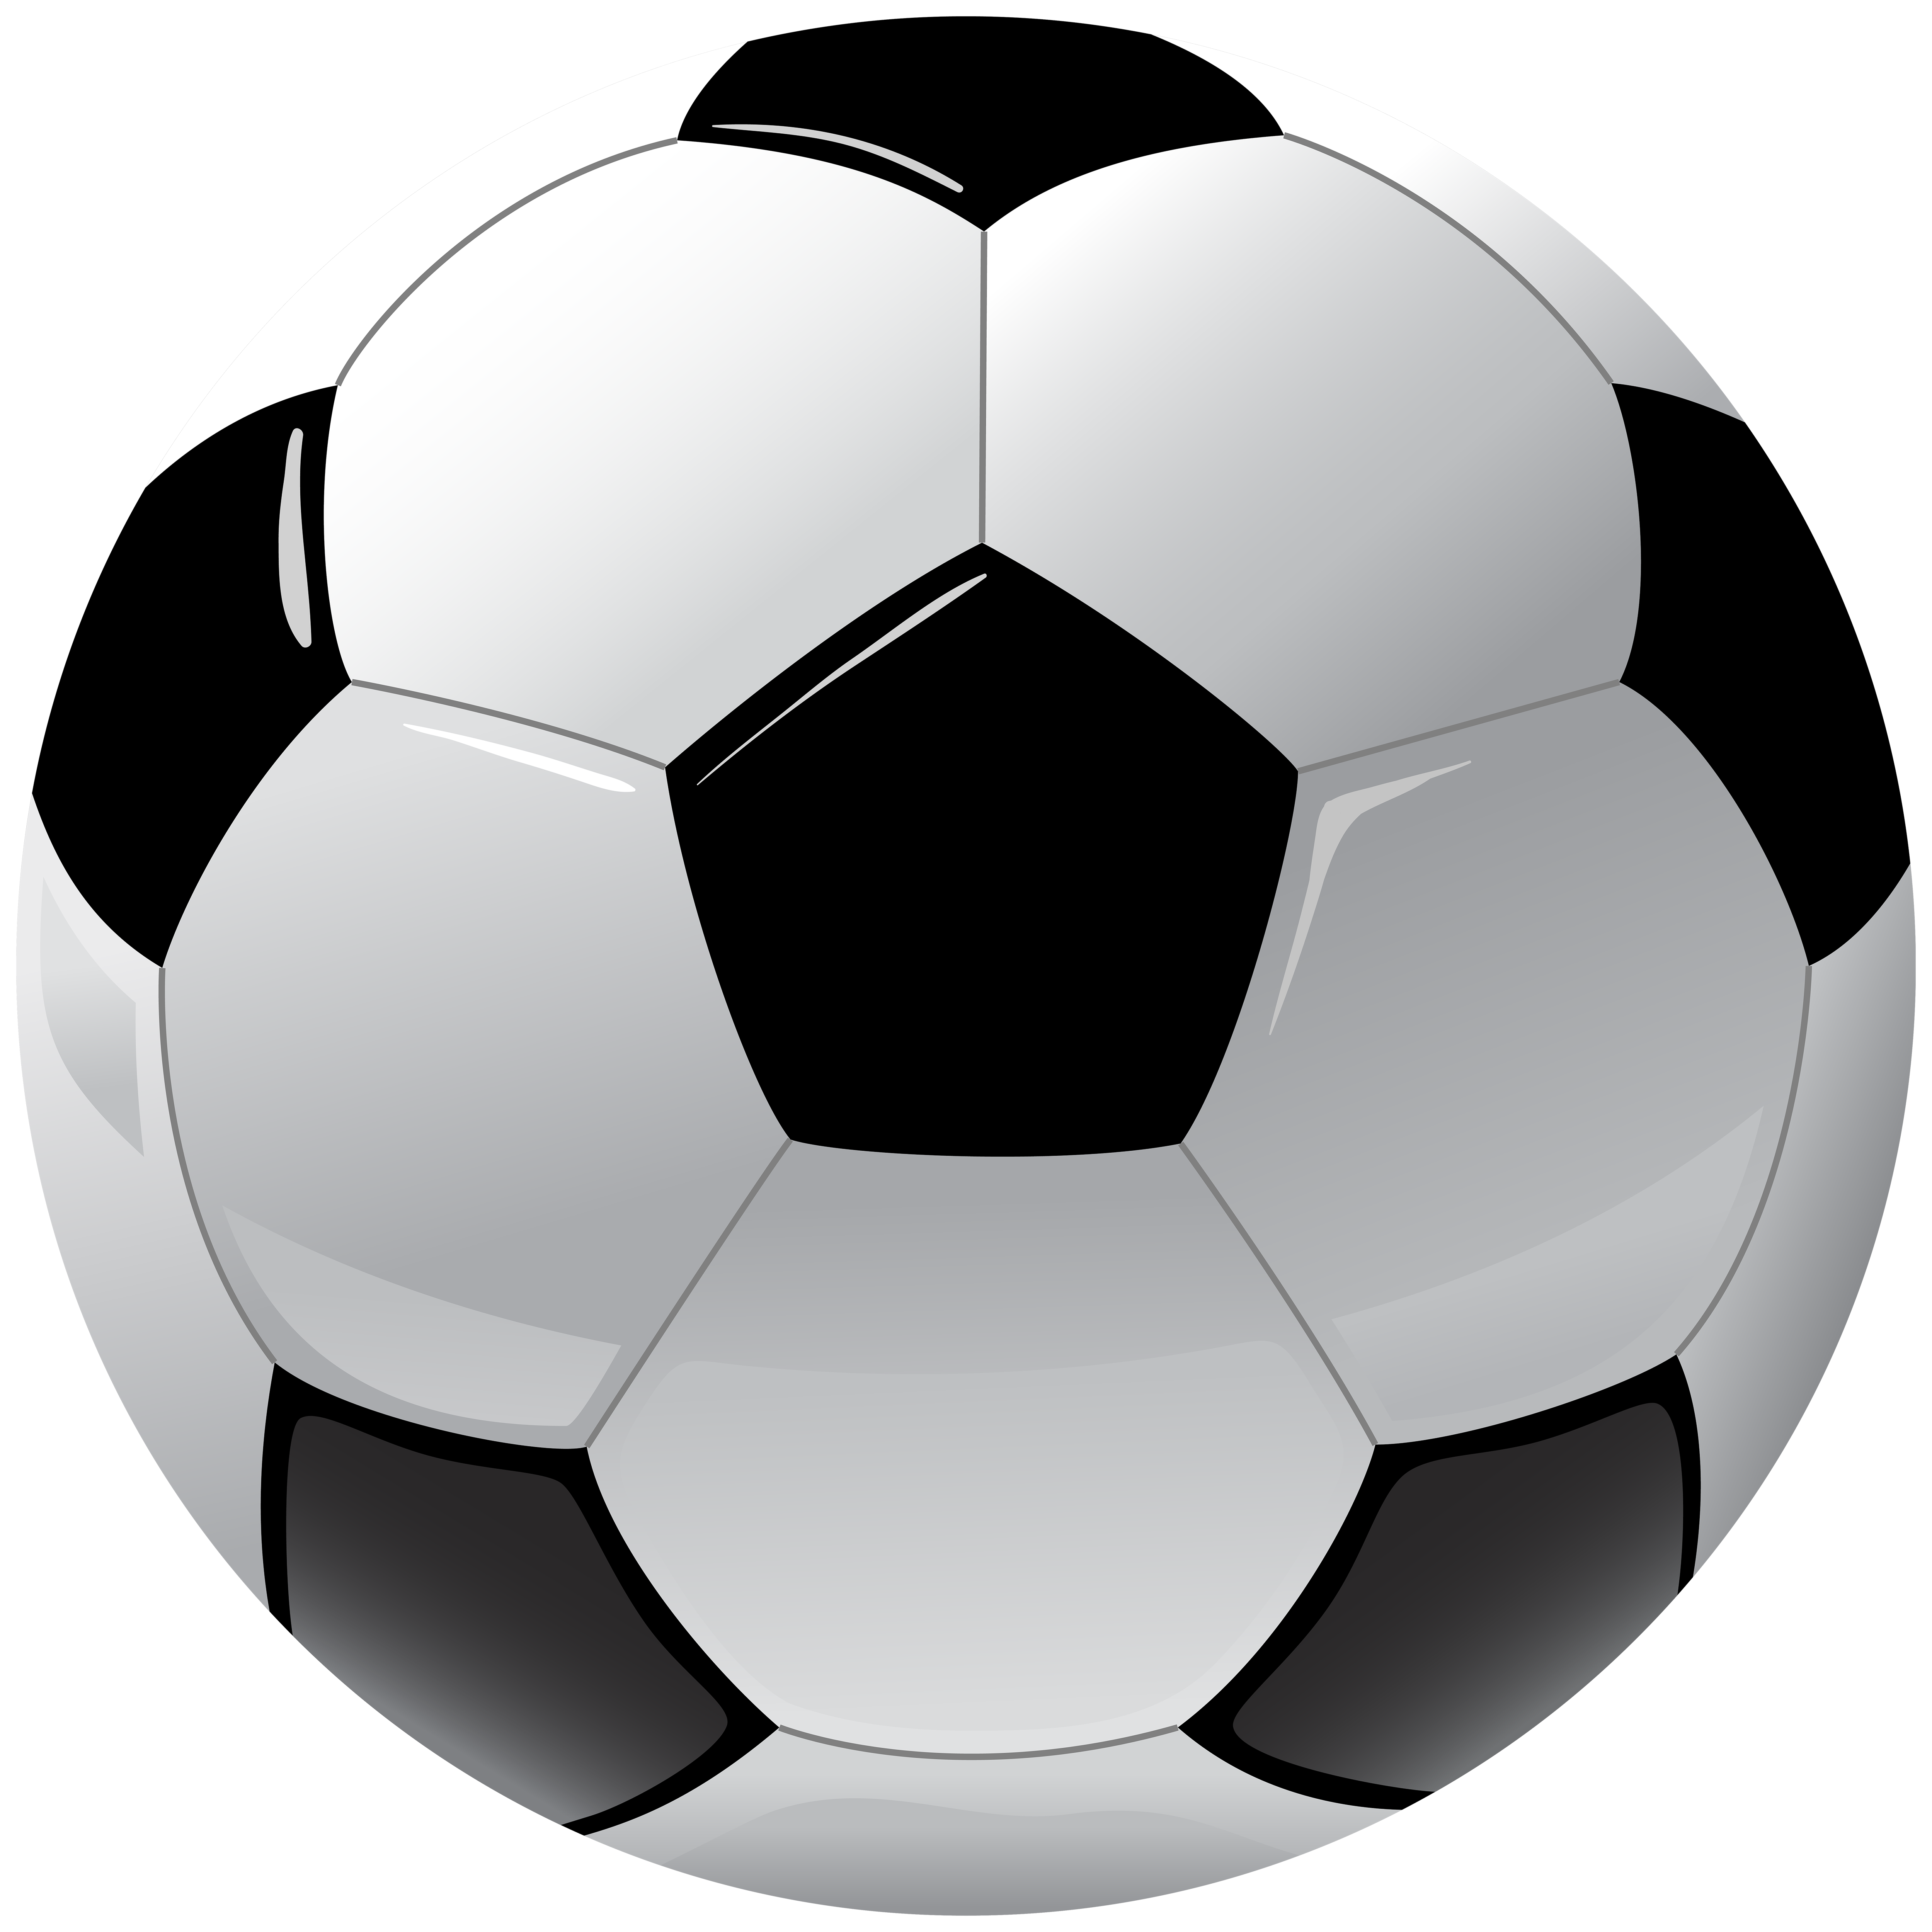 Black white Soccer Ball PNG Image With Transparent Background png #42409